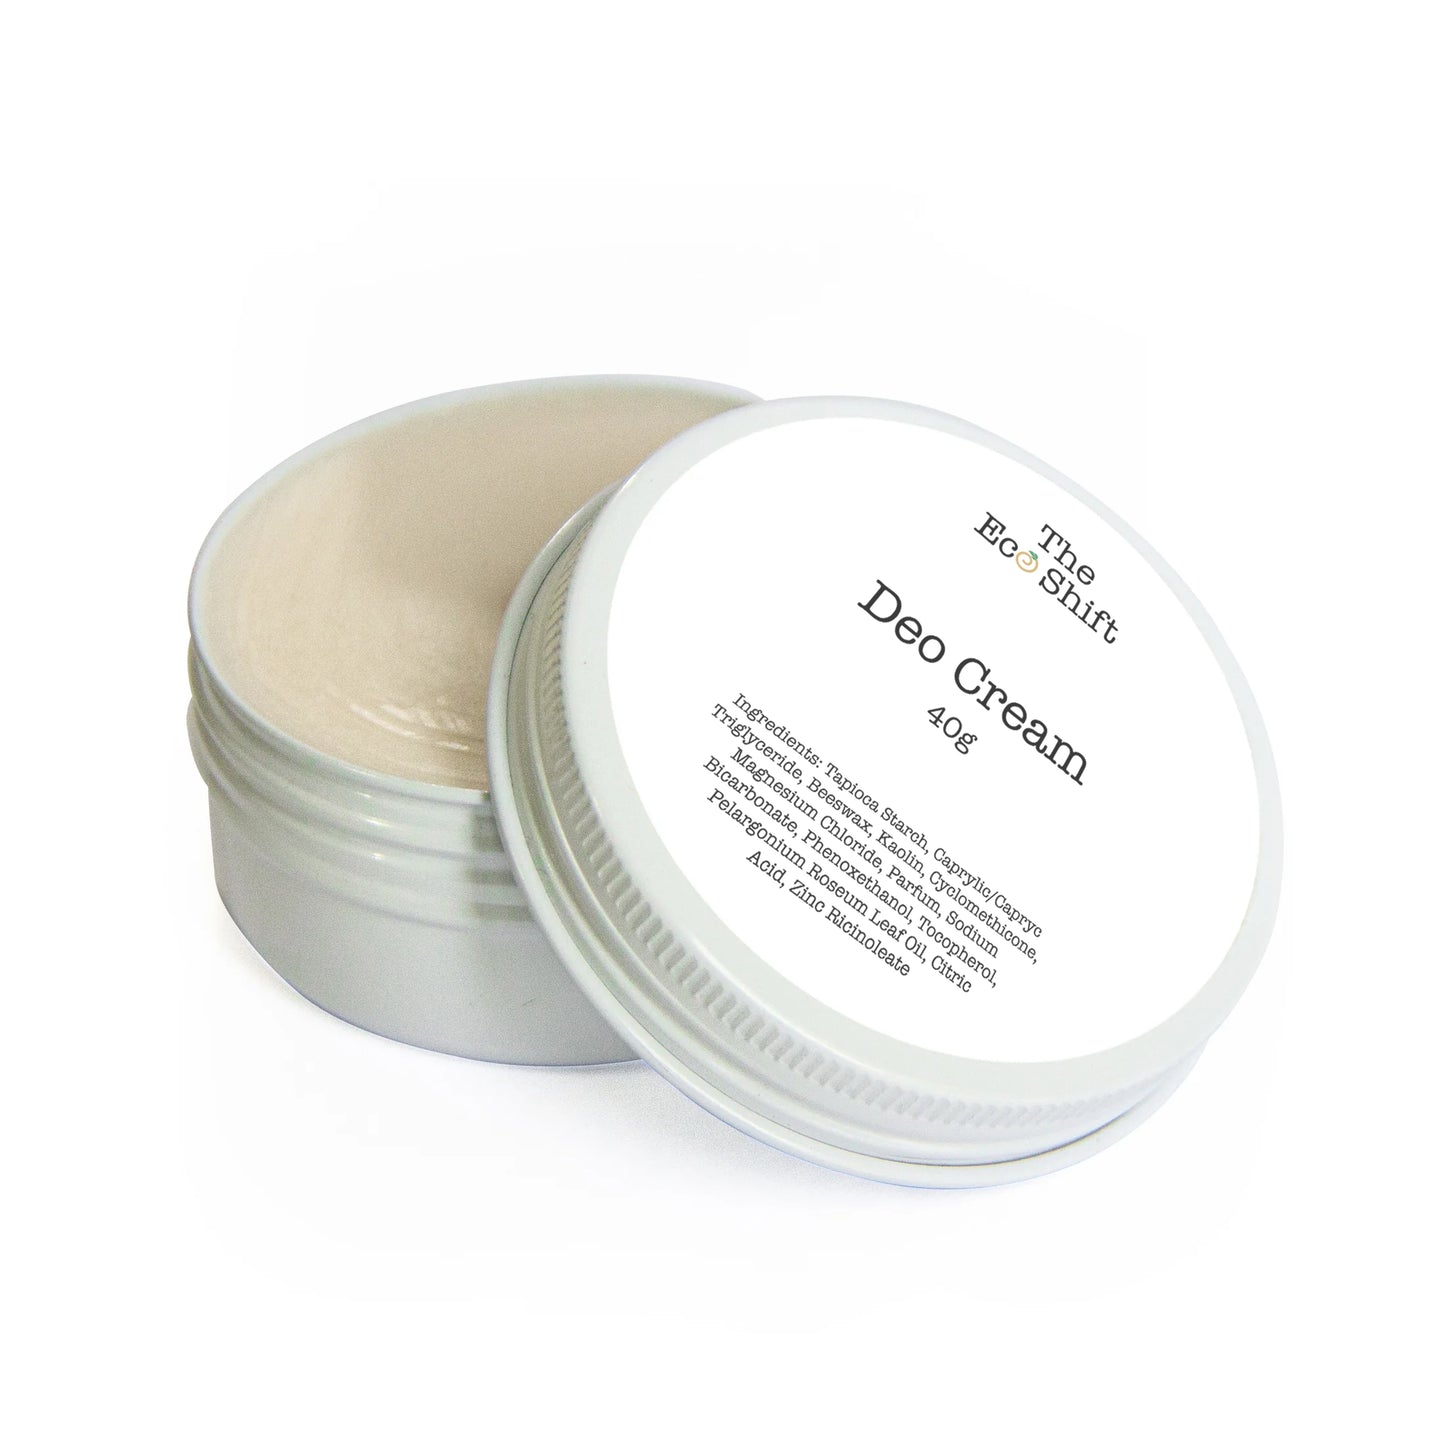 All Natural Deo Cream